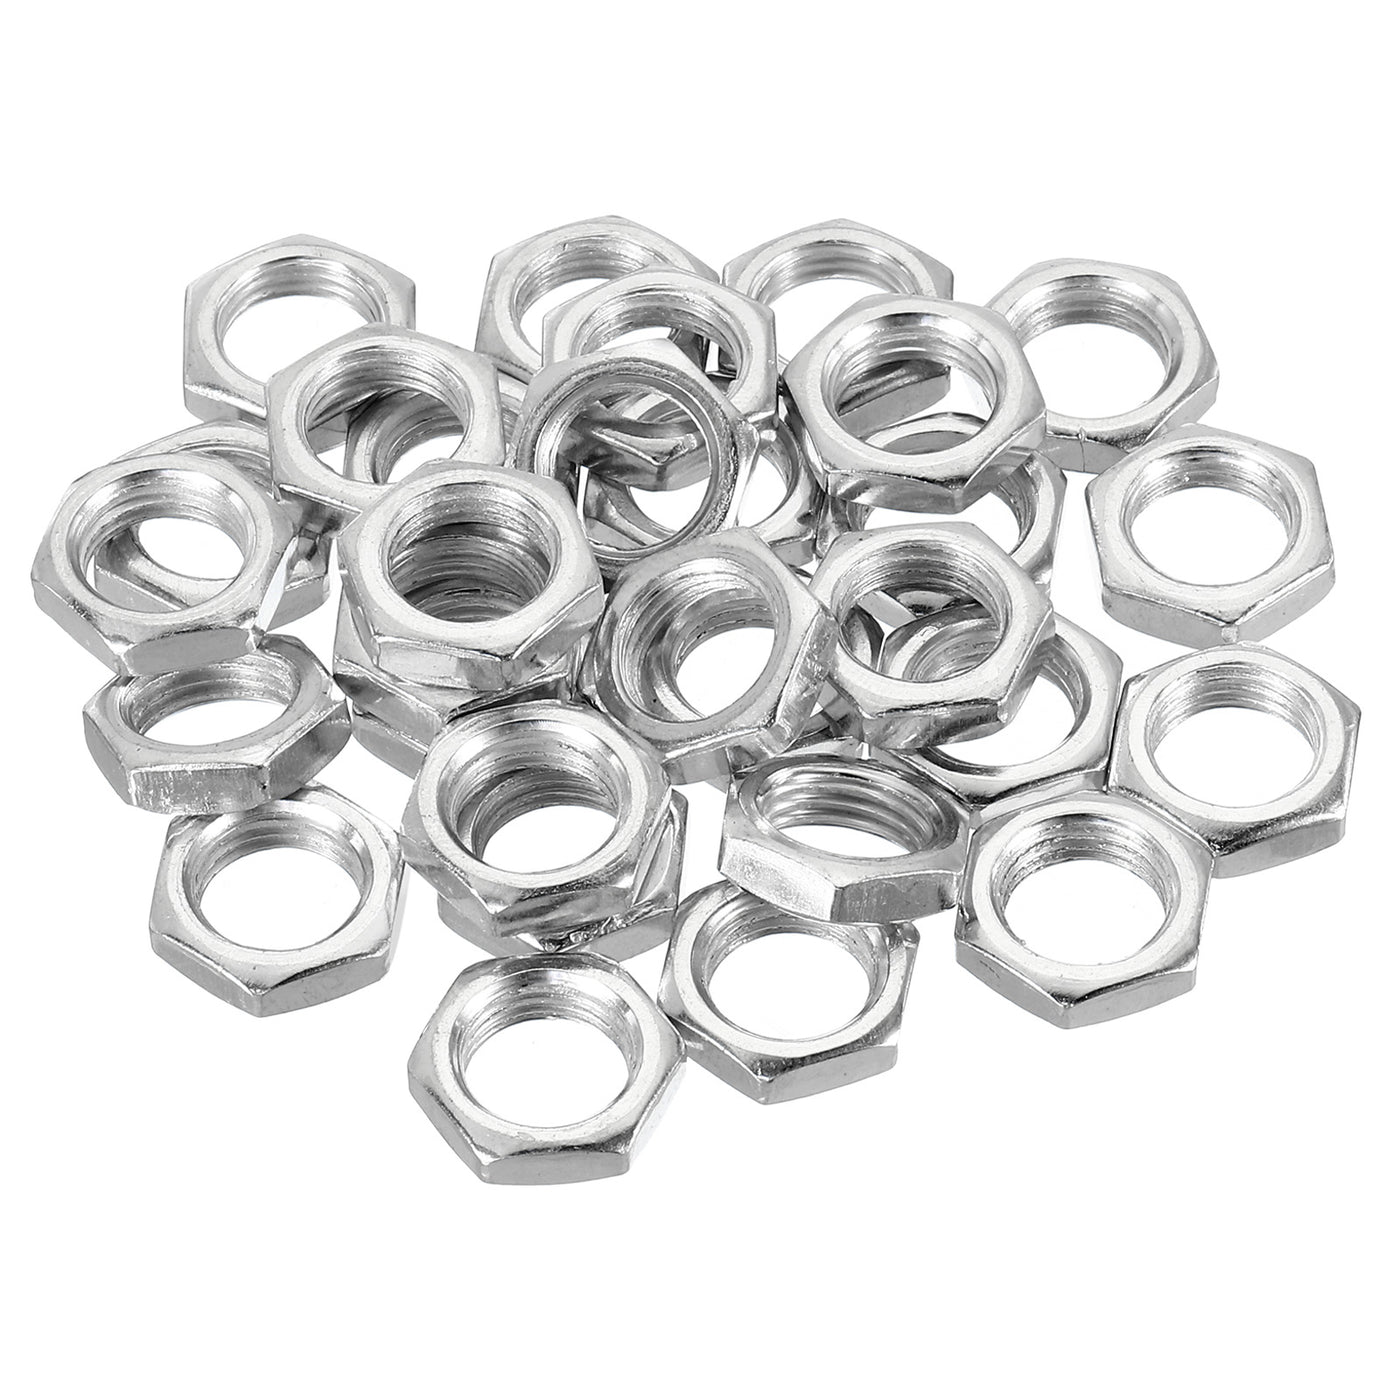 Harfington M10 x 1.0 Steel Hex Nuts, 30 Pack Metric Thread Zinc Plated Finished Hardware Nuts Screw Bolt Fasteners 4mm Height